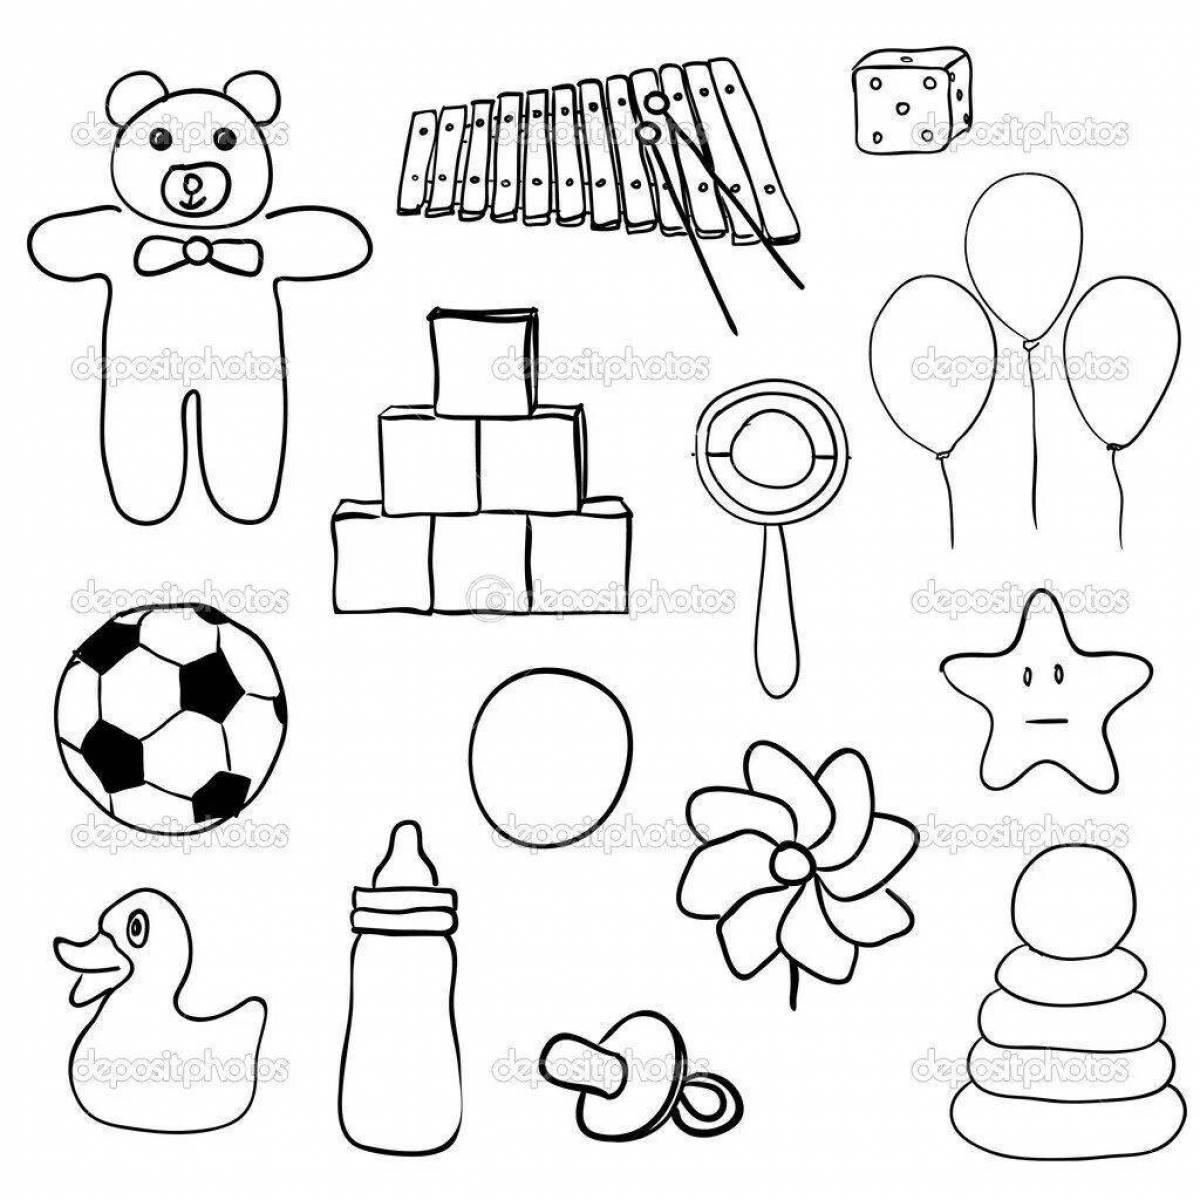 Colorful coloring pages for little inventors